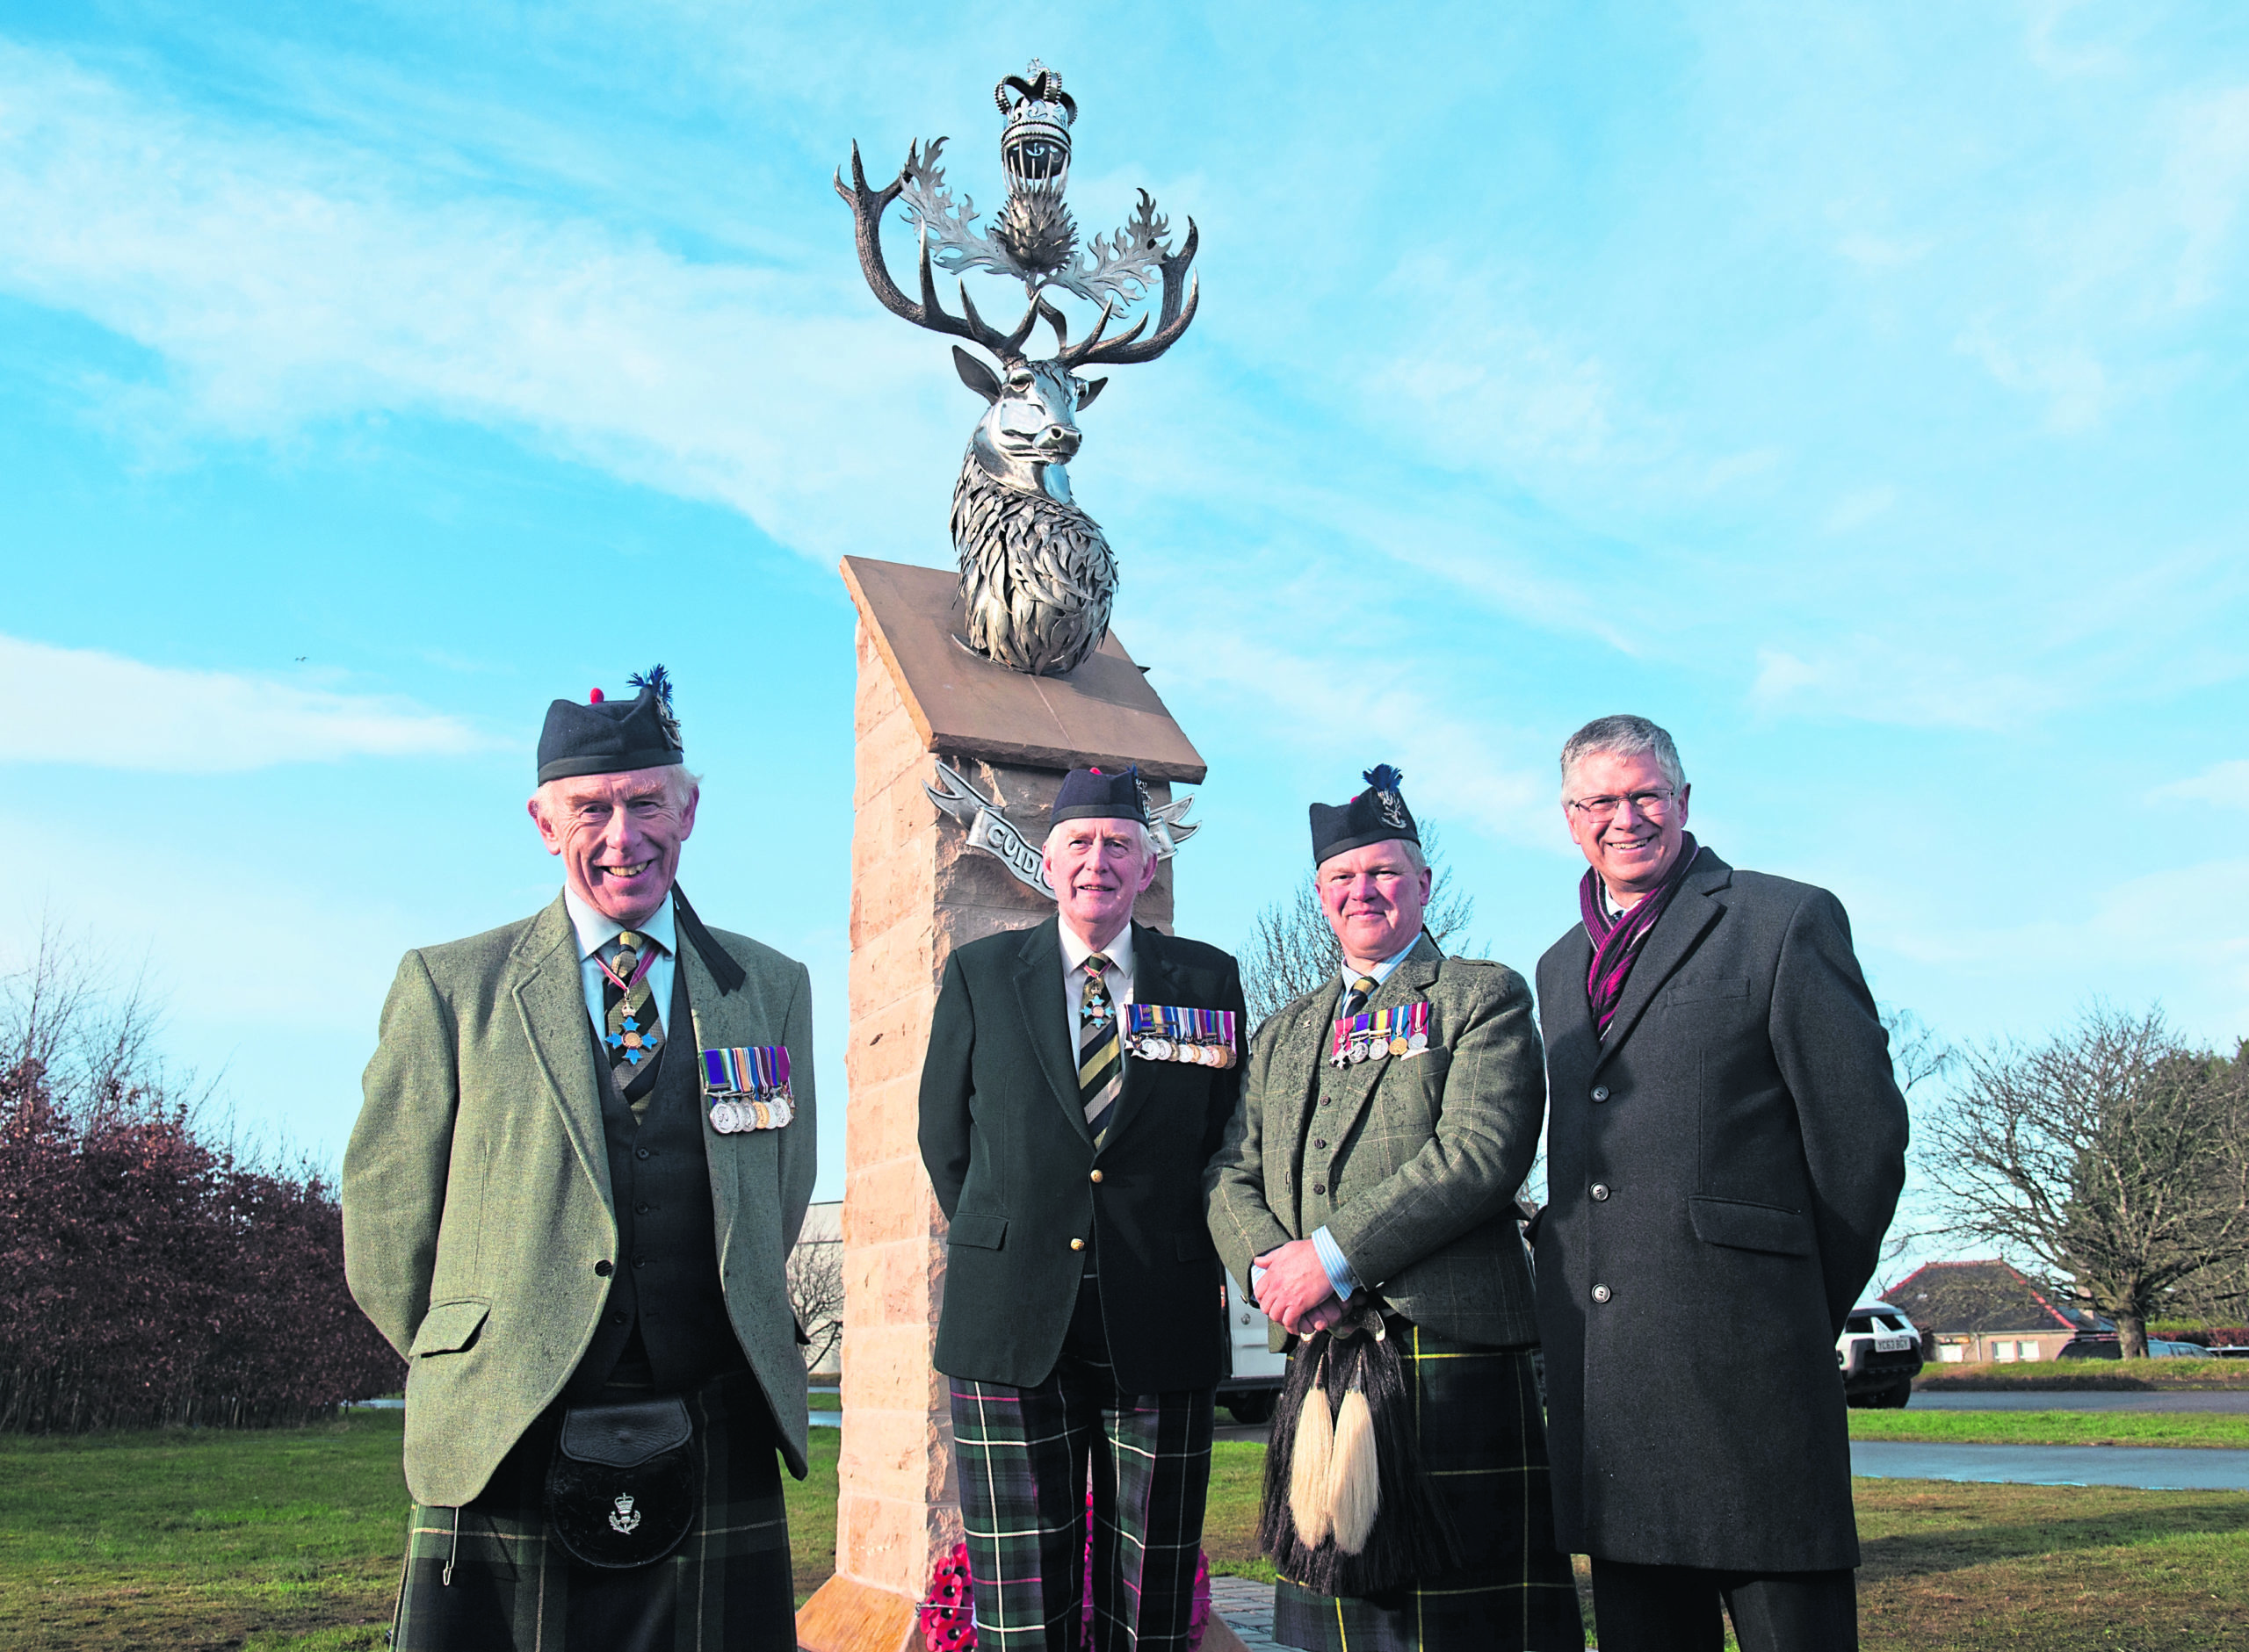 Ex-Brigadier Hugh Monro, Lord Lt of Moray Seymour Monro, Major Maurice Gibson and Andy Simpson Lord Lt Banffshire.
Picture by Jason Hedges